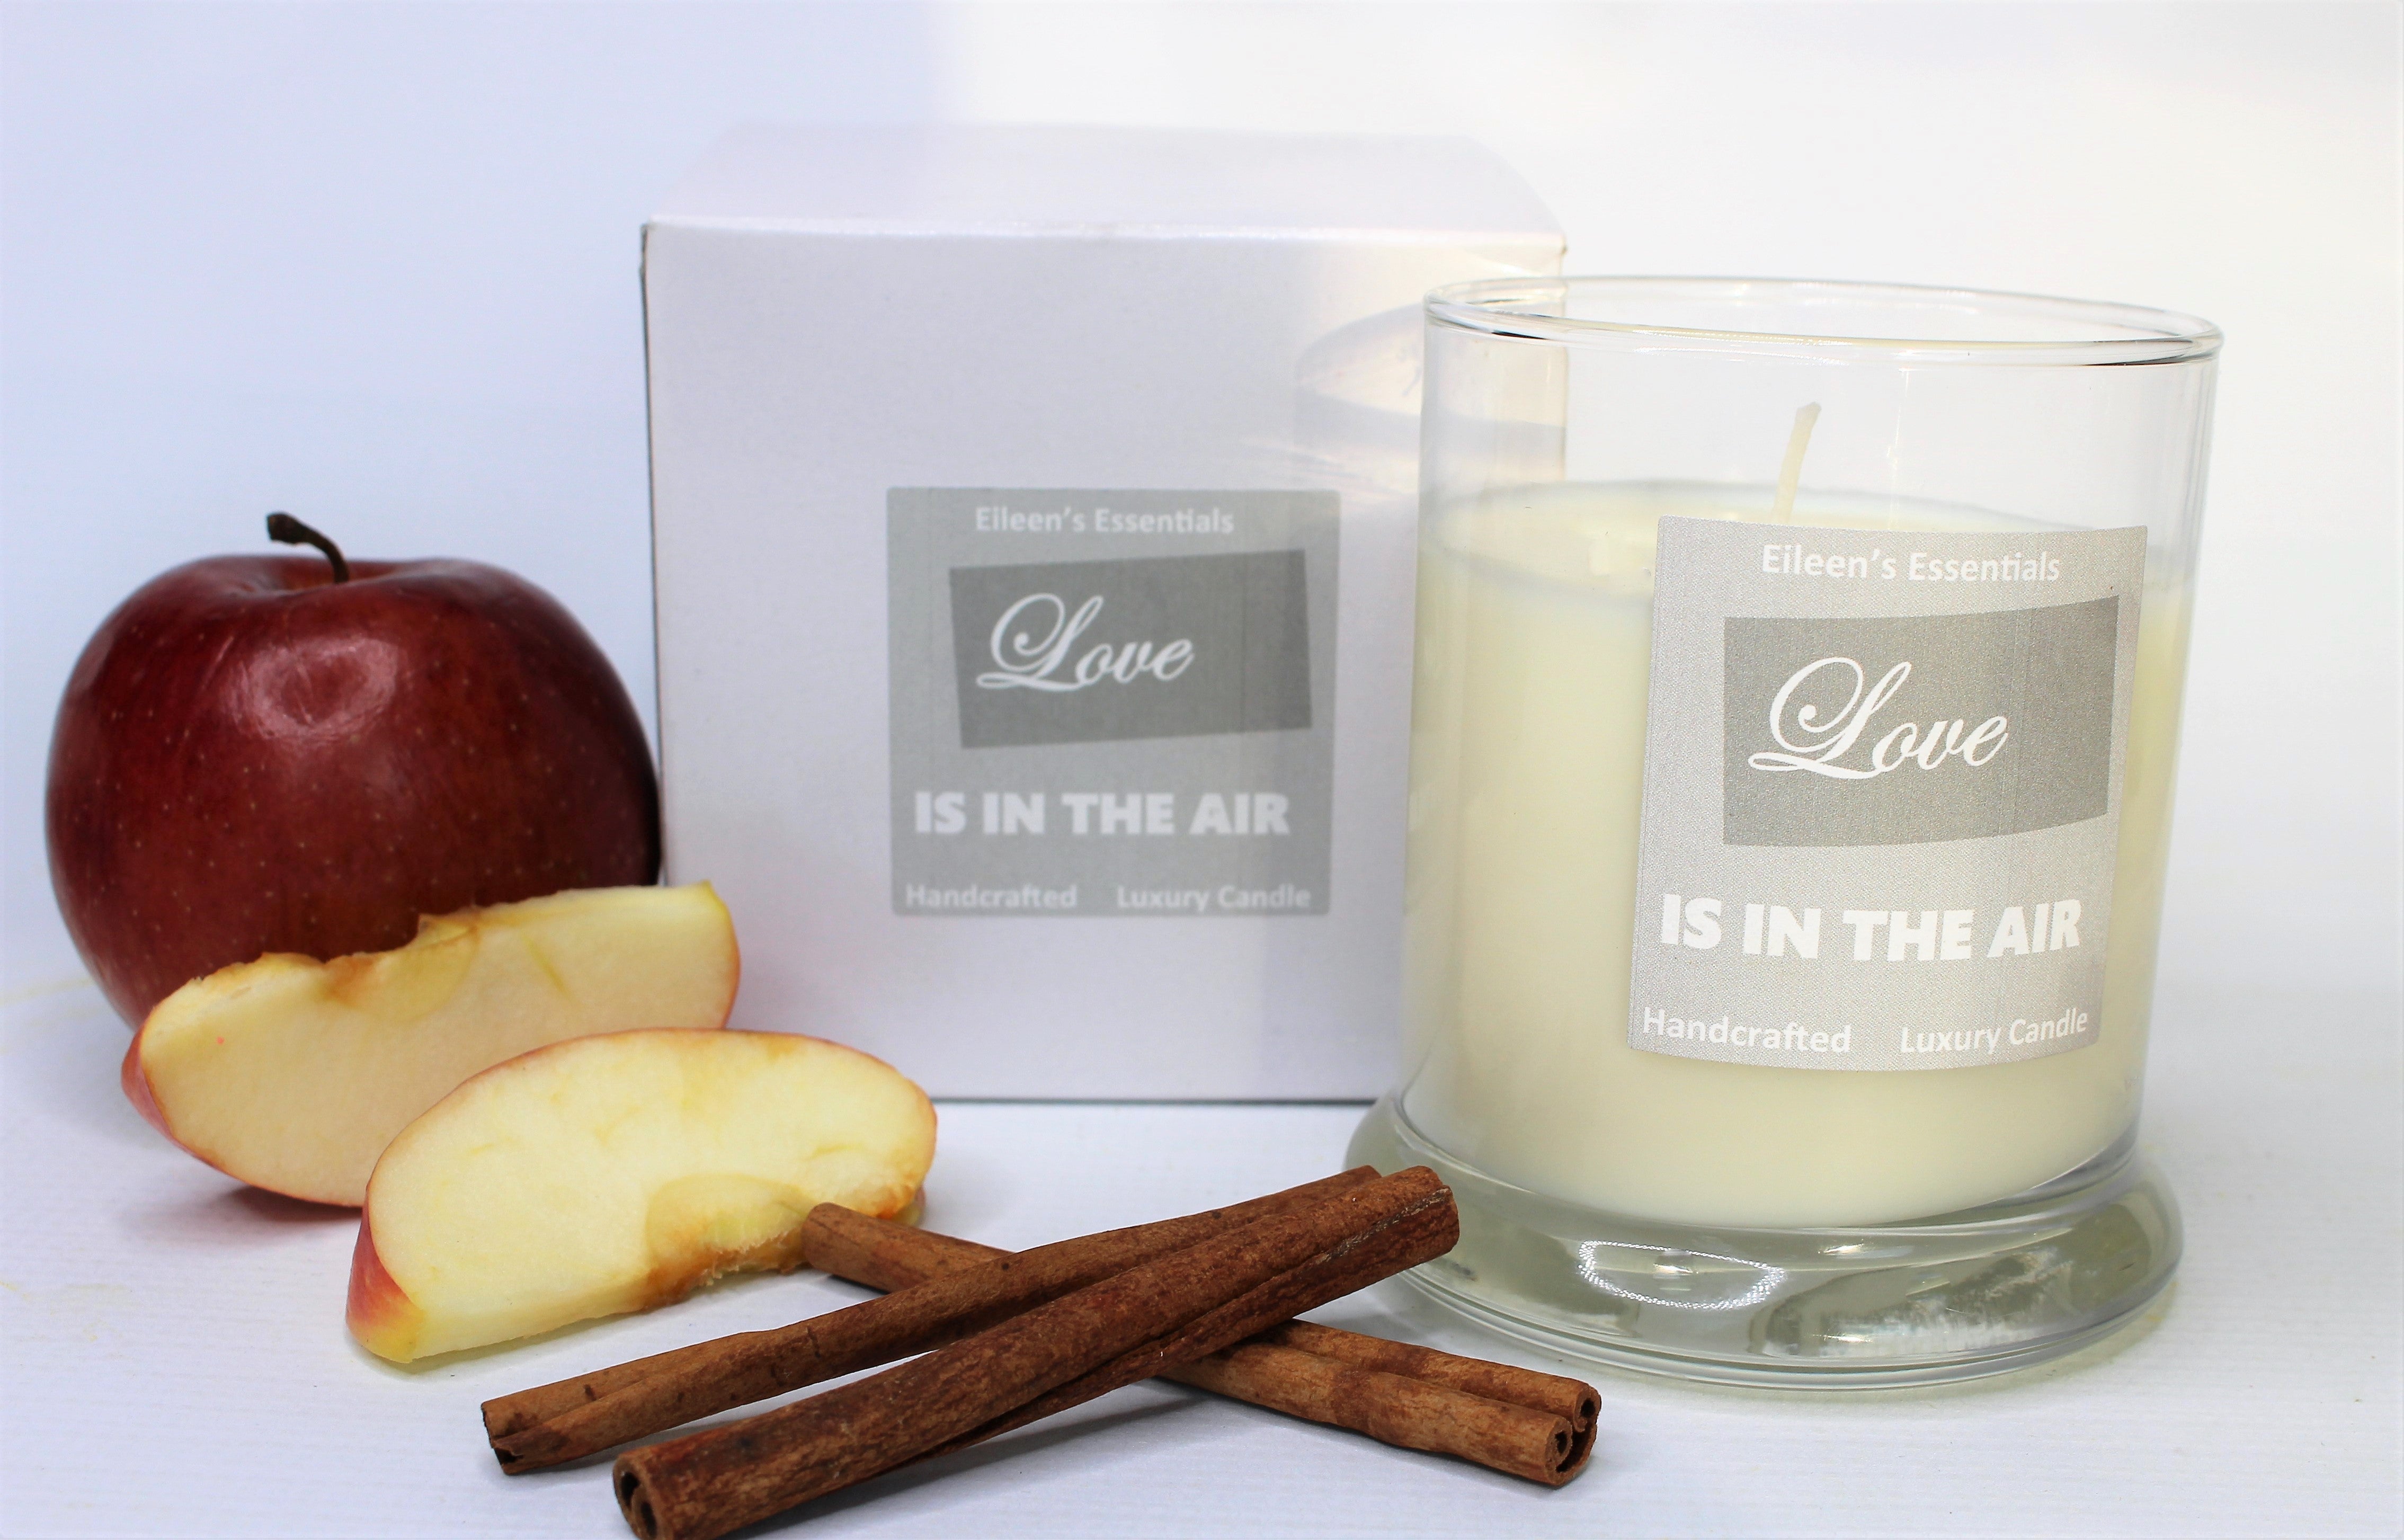 Signature Scent; LOVE IS IN THE AIR - Eileen's Essentials